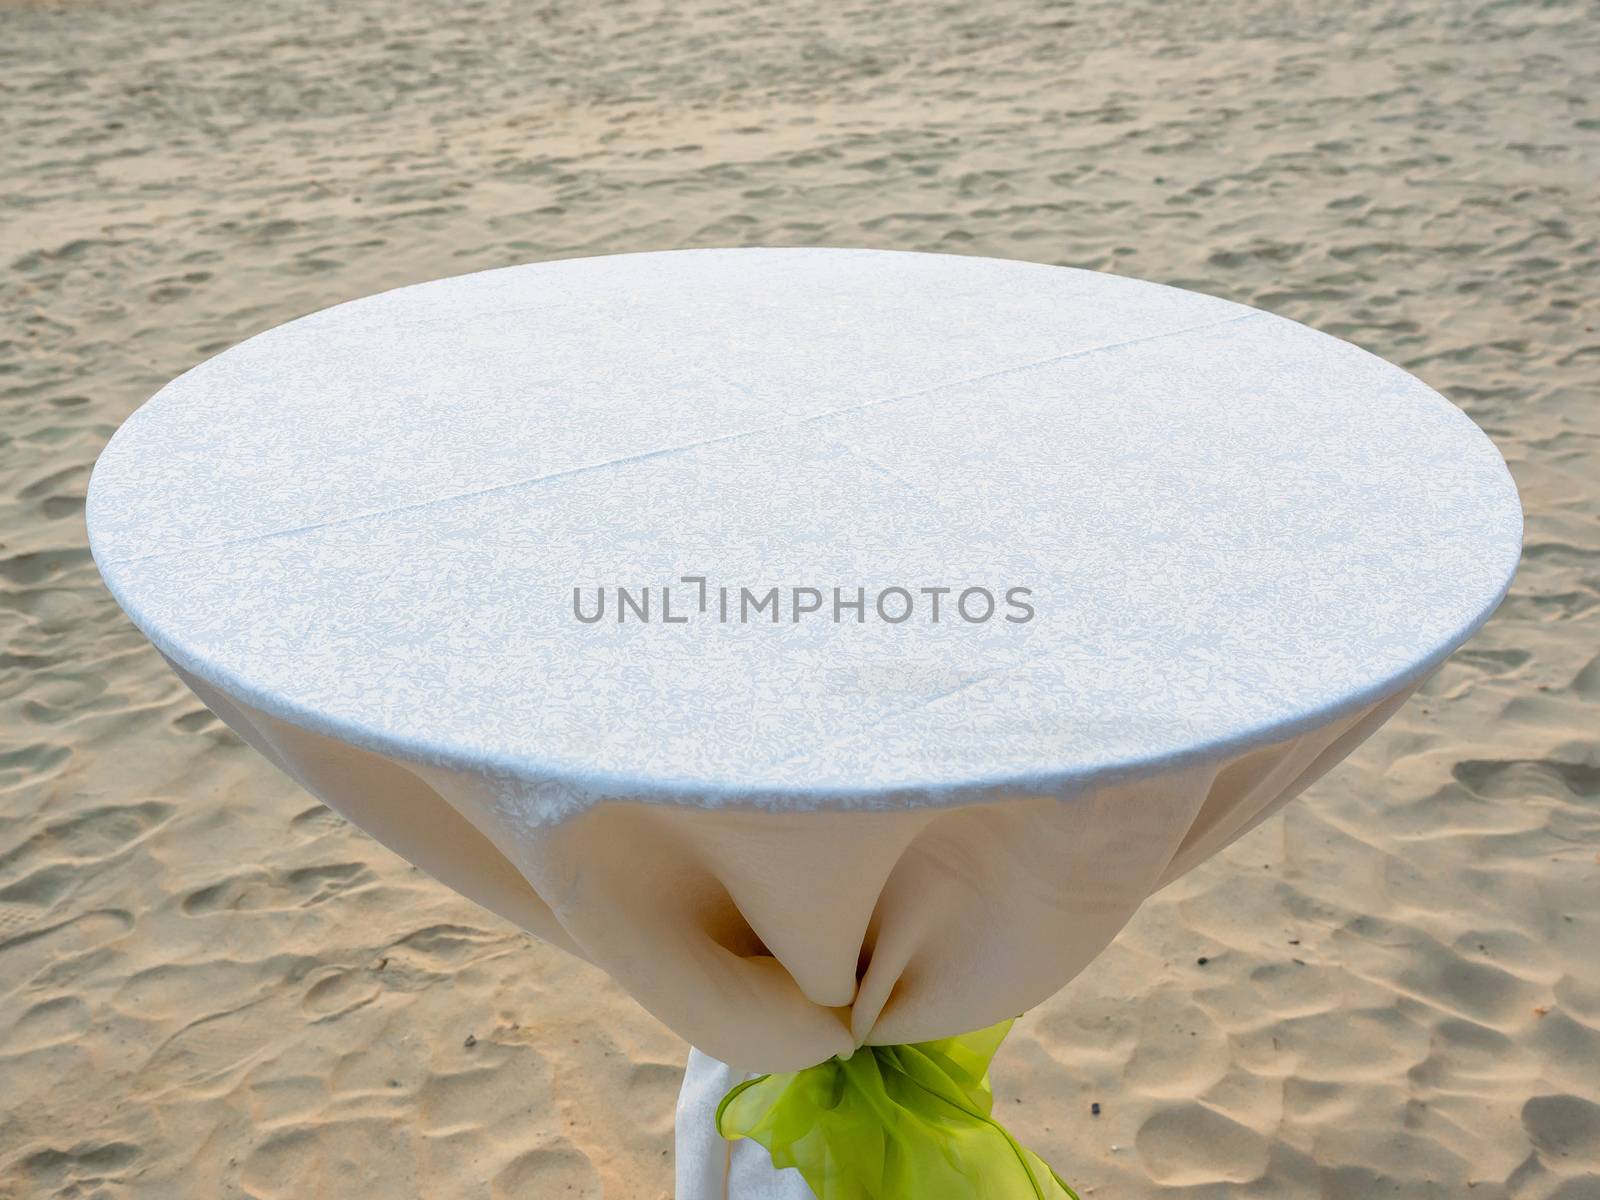 Empty round dining table with white tablecloth and light green b by tete_escape